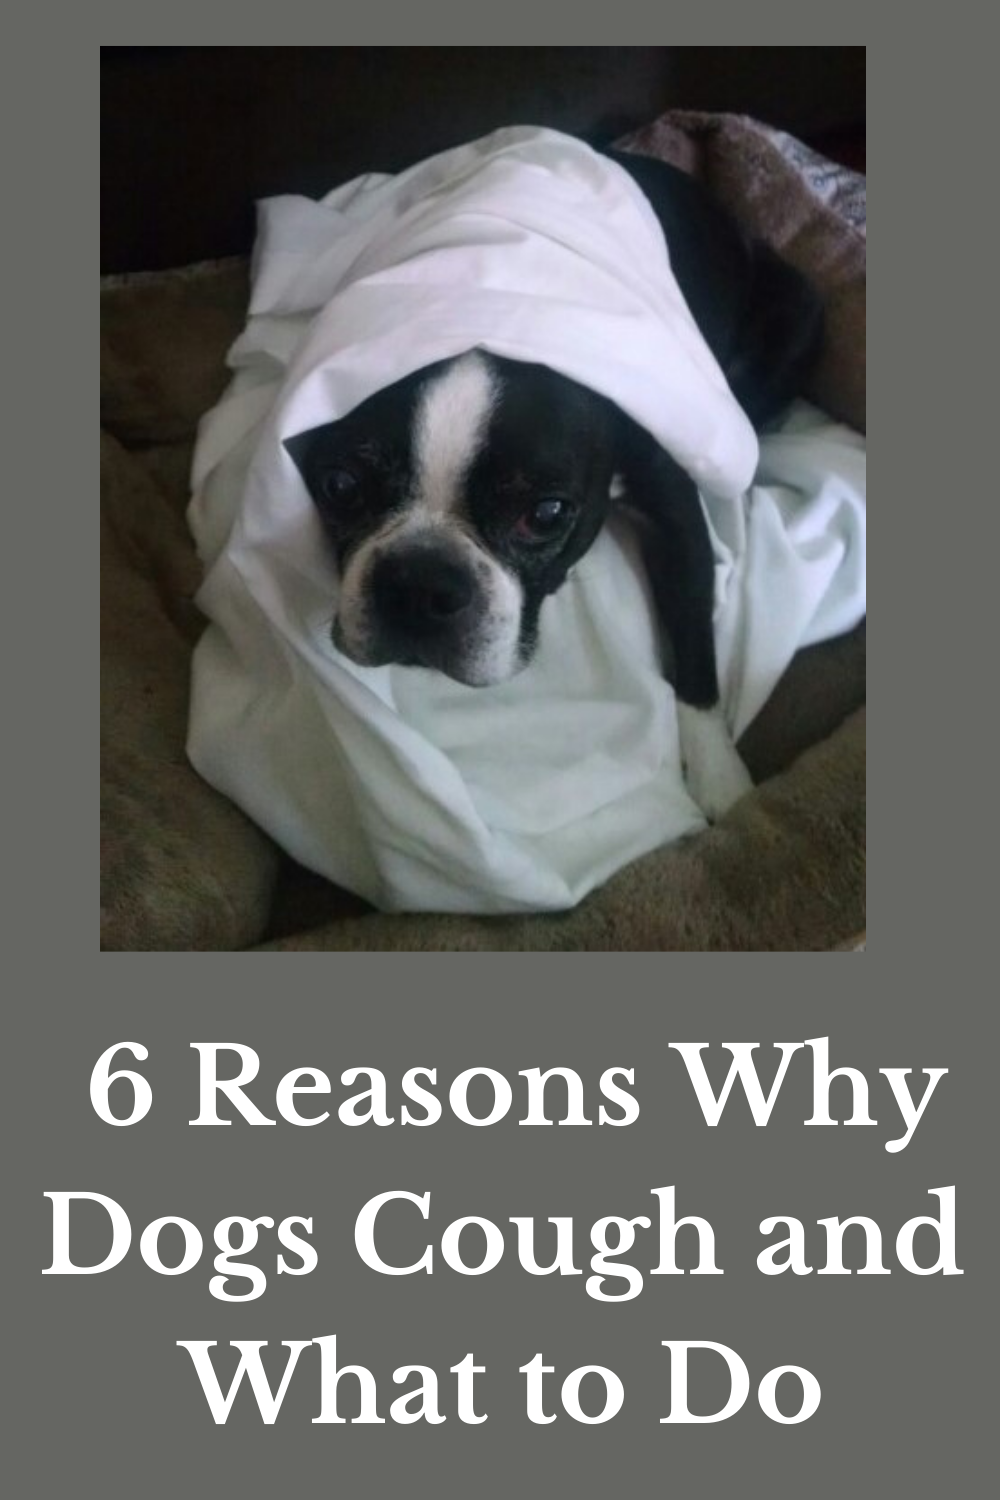 Why is My Dog Coughing?